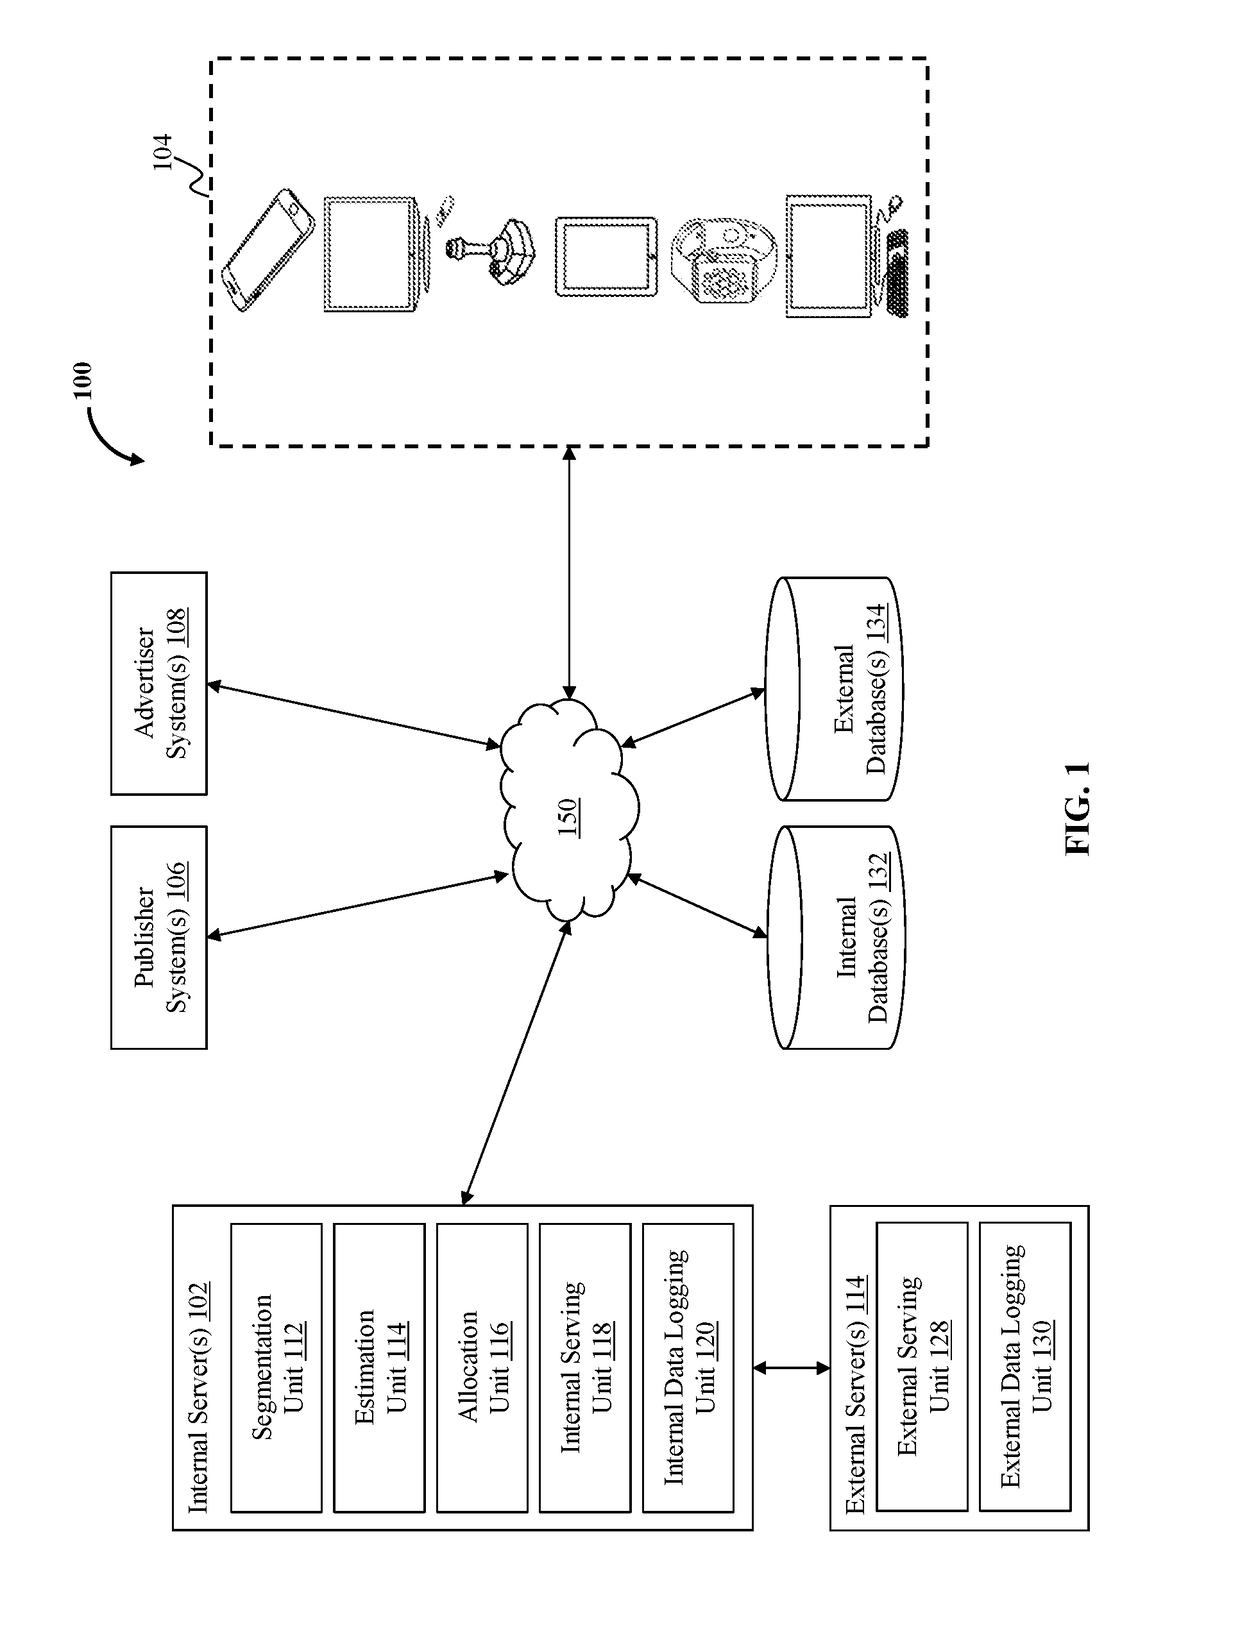 Method and system for persistent account generation and profiling